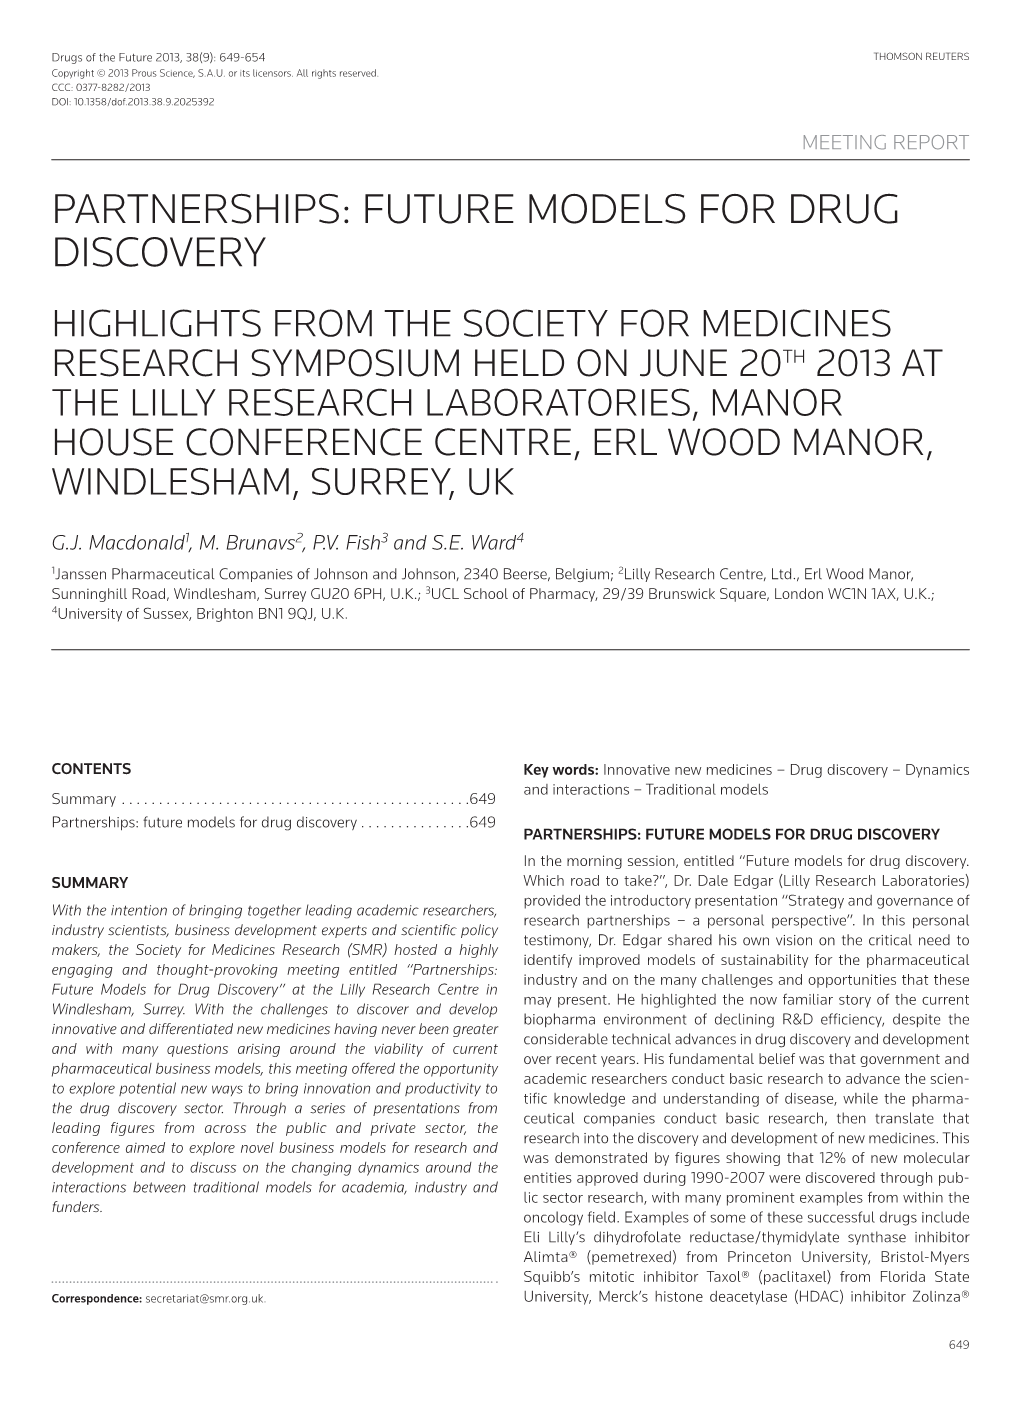 Future Models for Drug Discovery. Highlights from the Society For